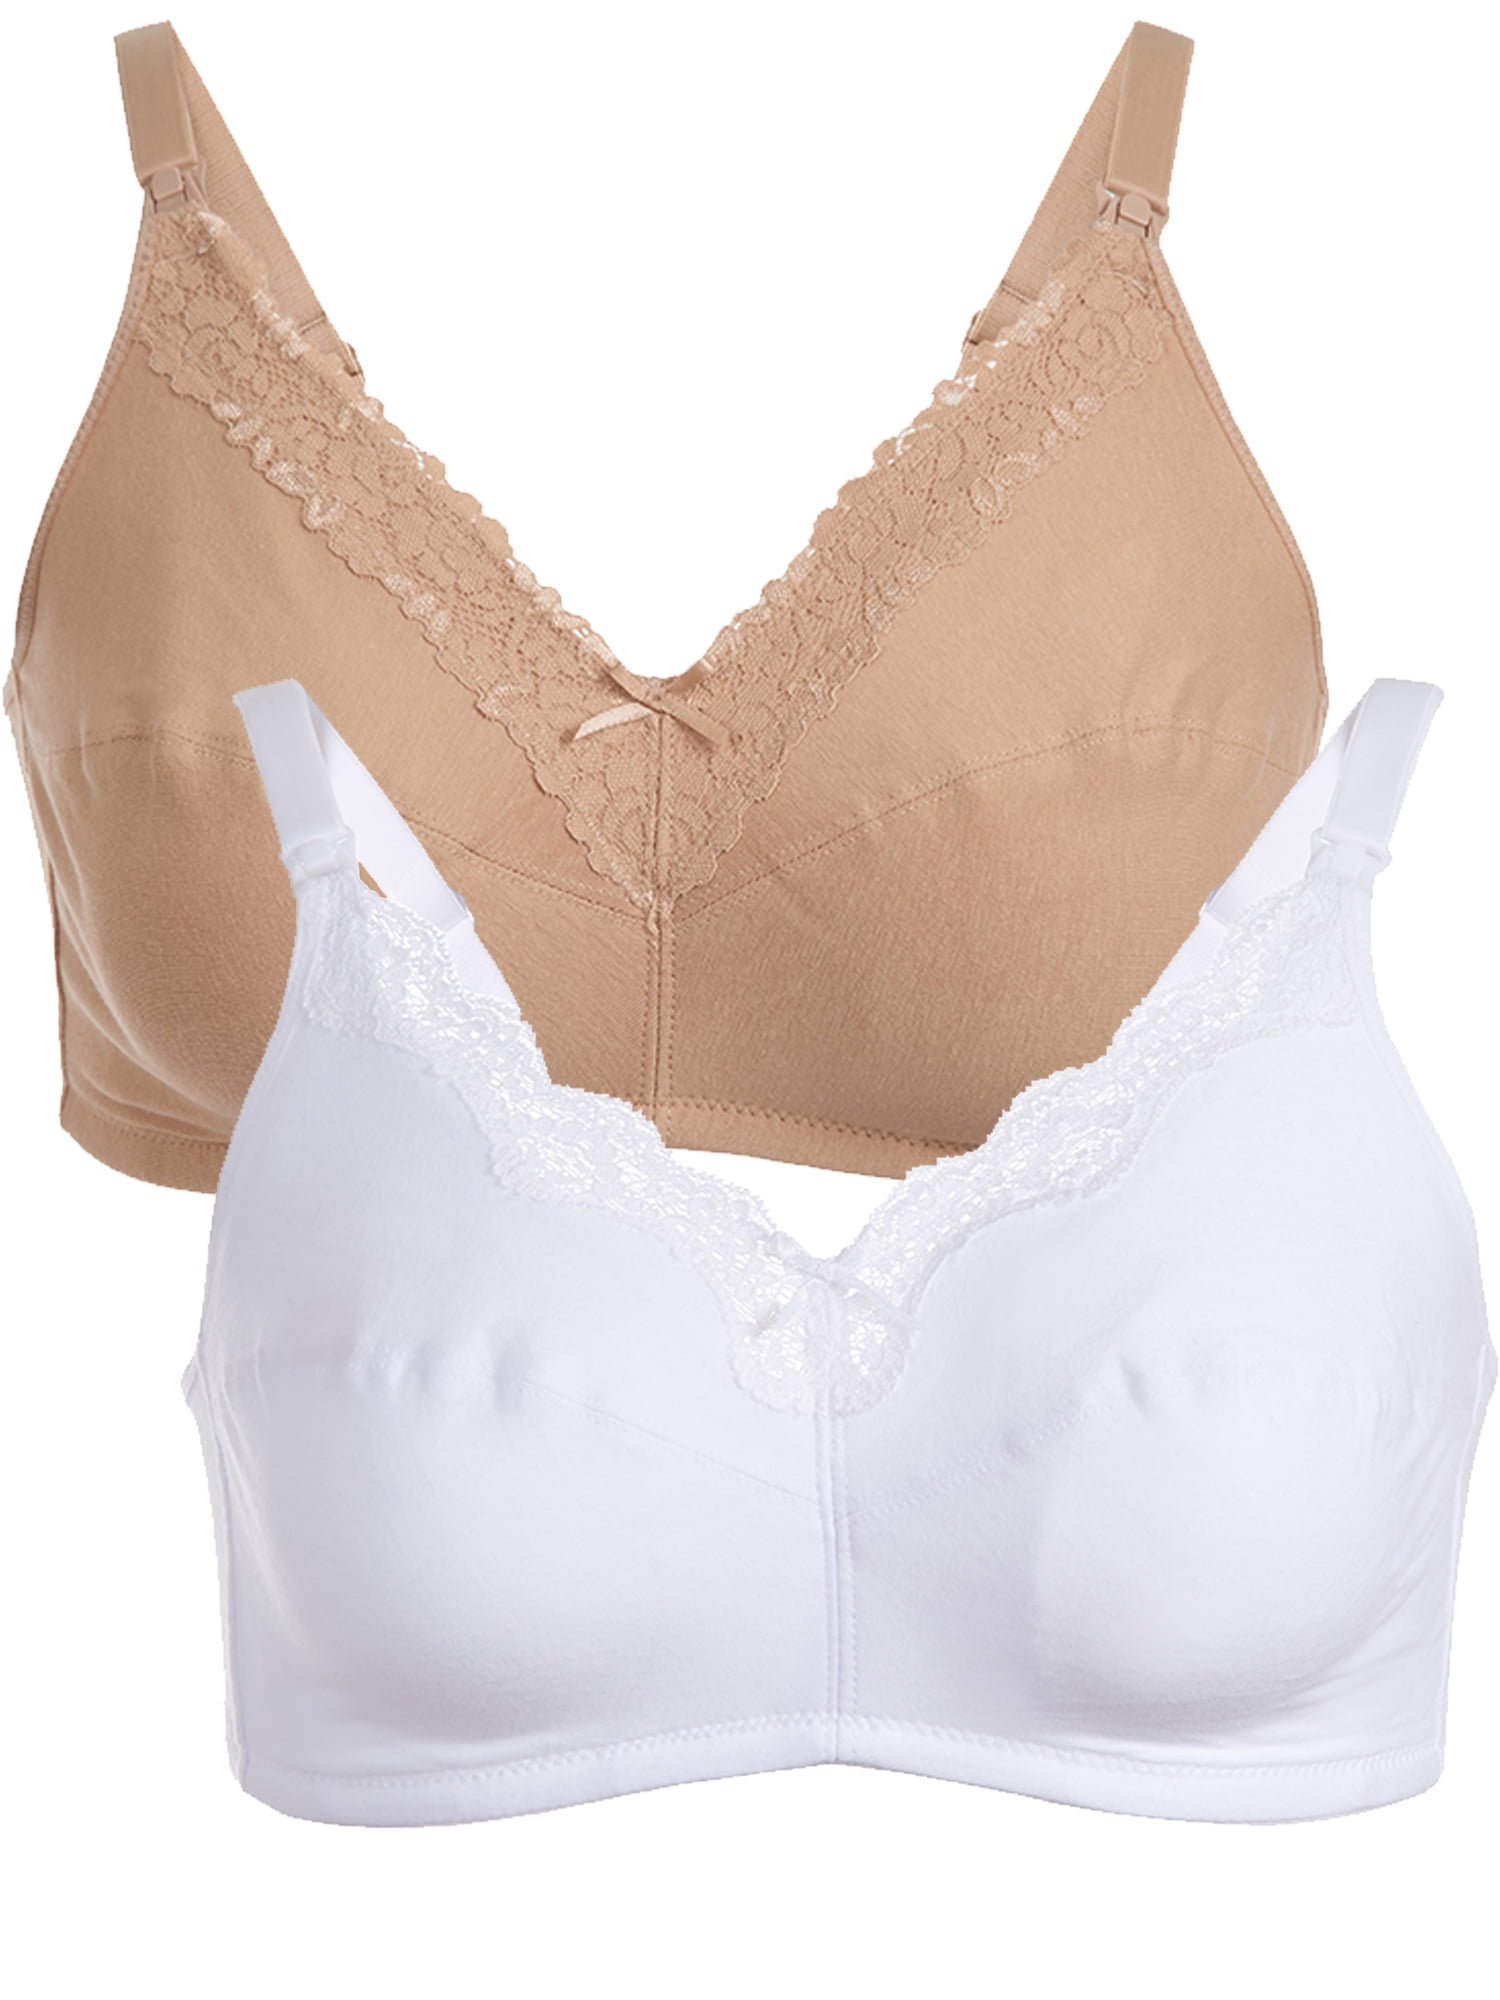 Pack of 2 Crossover Bras, Lace Finish, Maternity & Nursing Special - white,  Maternity